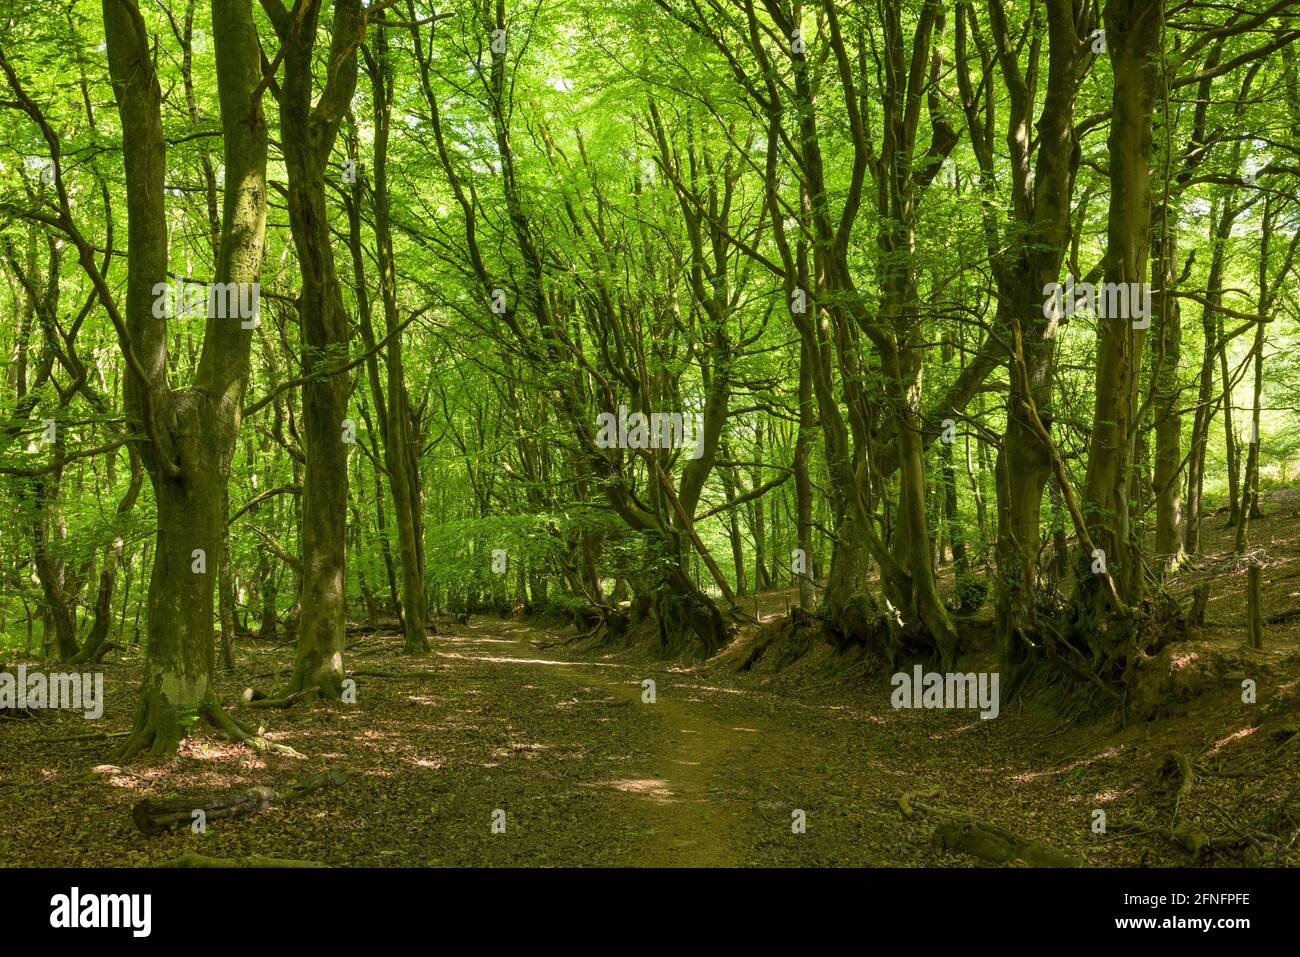 A beech woodland in the Quantock Hills Area of Outstanding Natural Beauty in springtime near Over Stowey, Somerset, England. Stock Photo